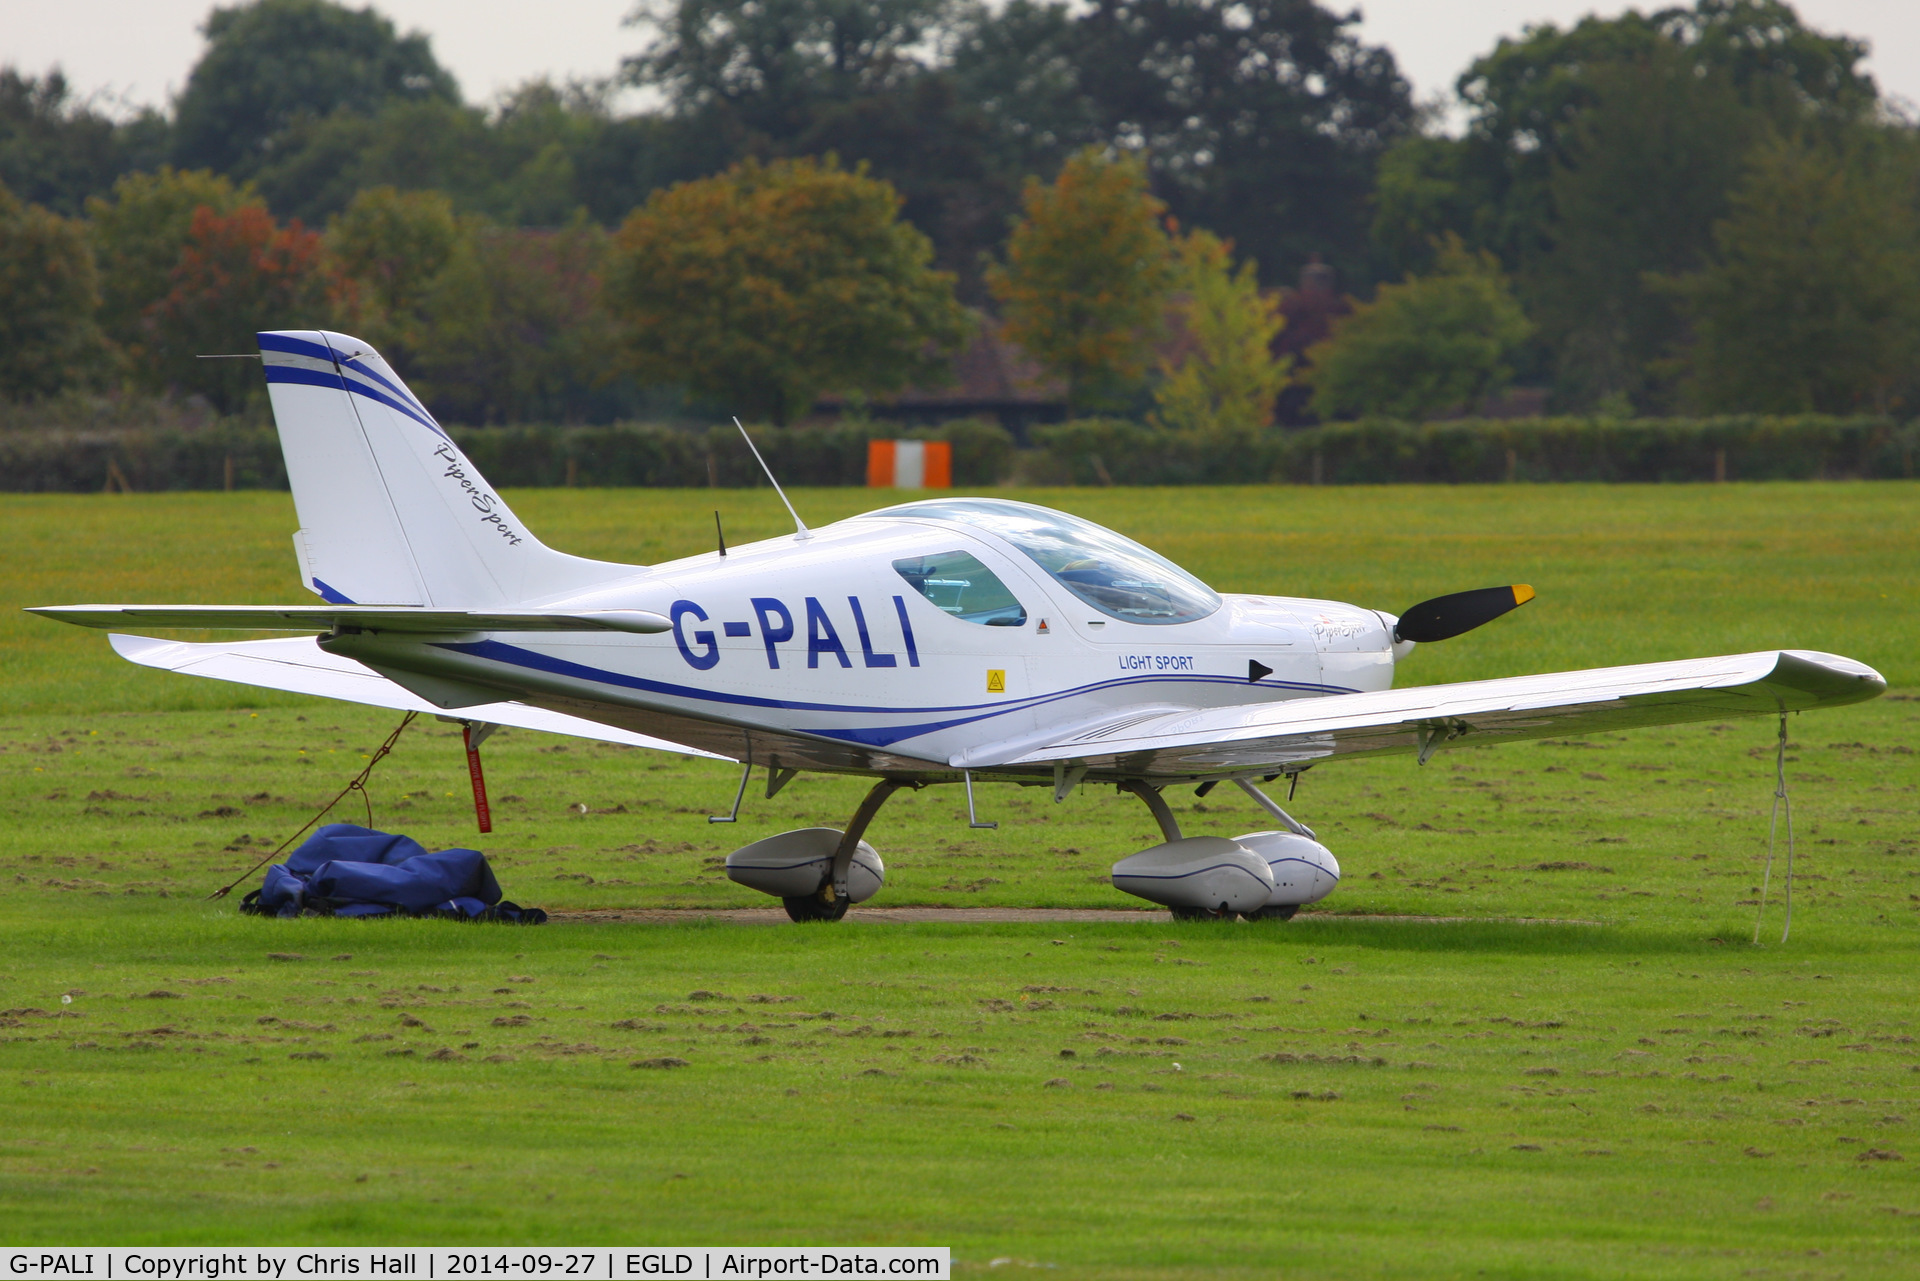 G-PALI, 2010 CZAW Piper sport C/N P1001040, privately owned